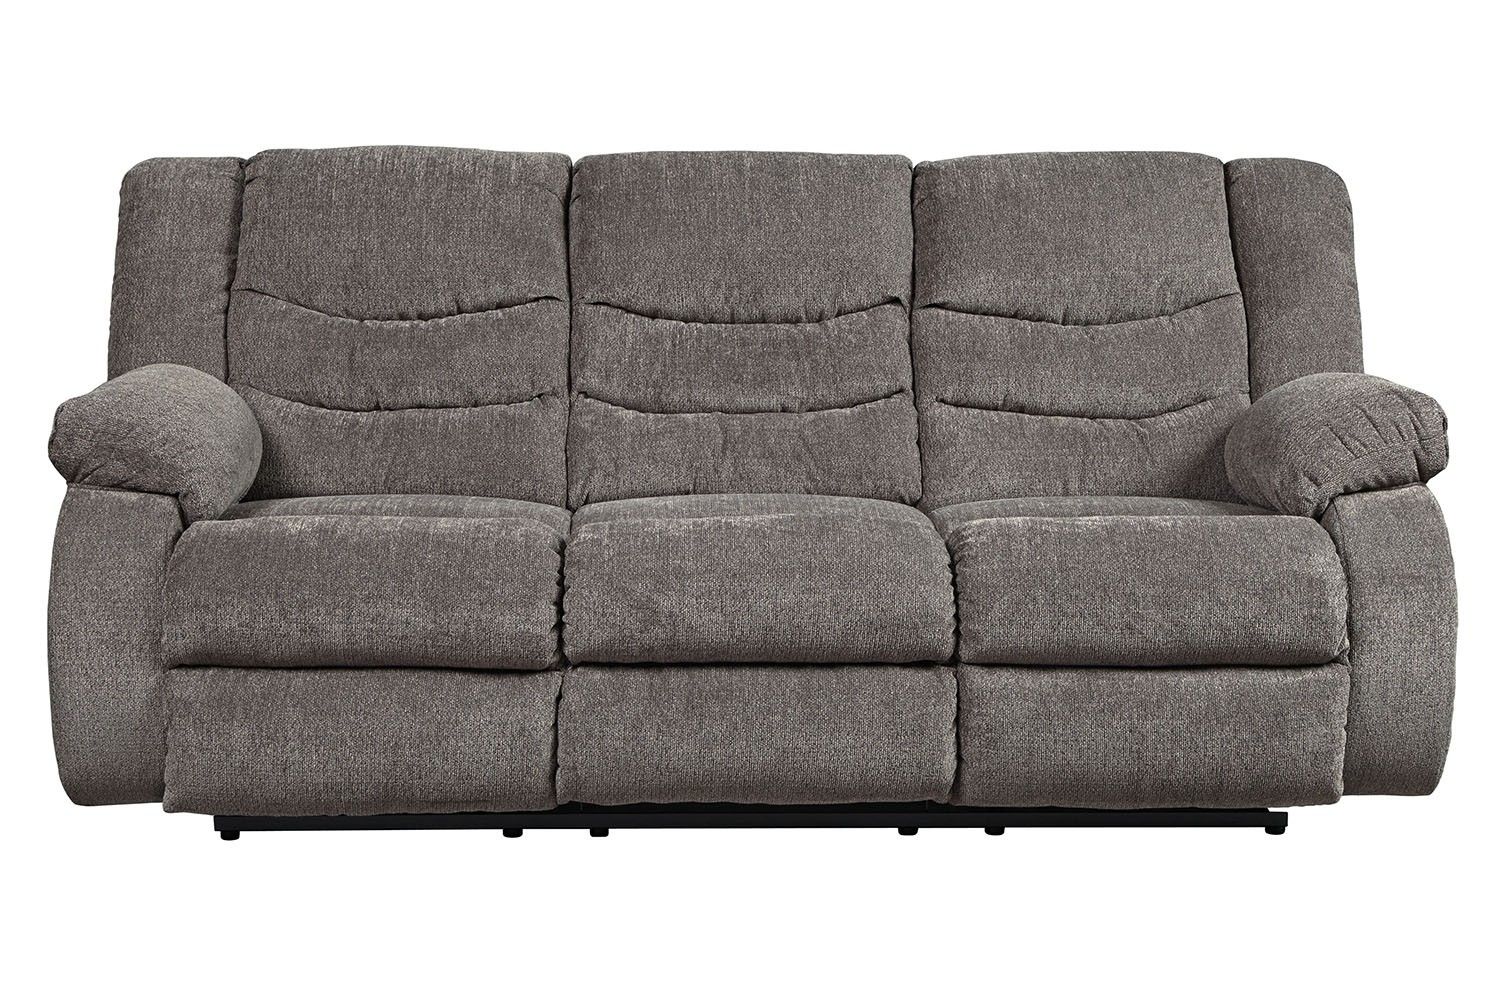 Sofas & Couches | Save Mor Online And In Store Within Avery 2 Piece Sectionals With Raf Armless Chaise (View 14 of 25)